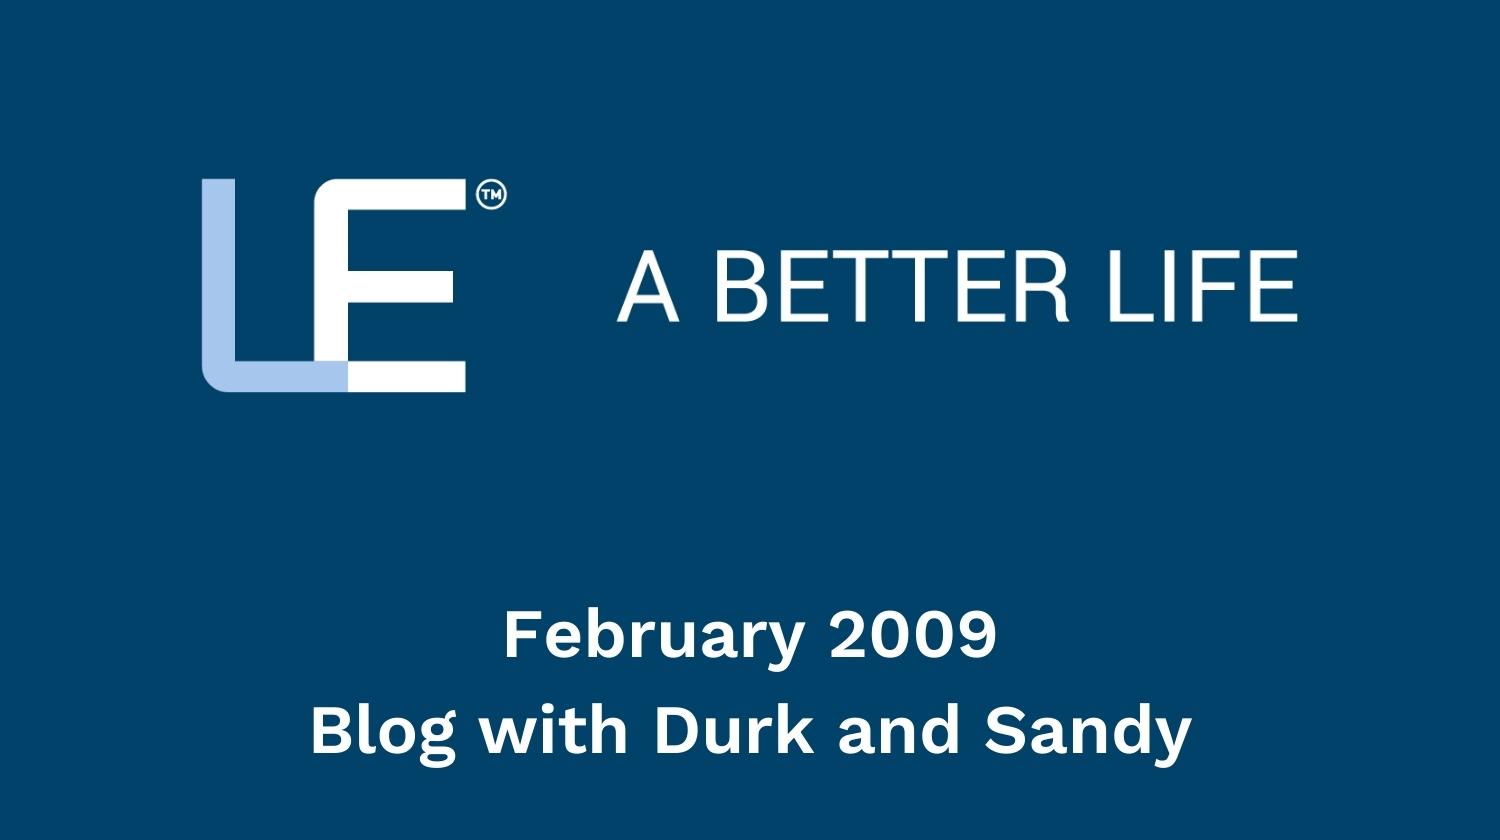 February 2009 Blog with Durk and Sandy